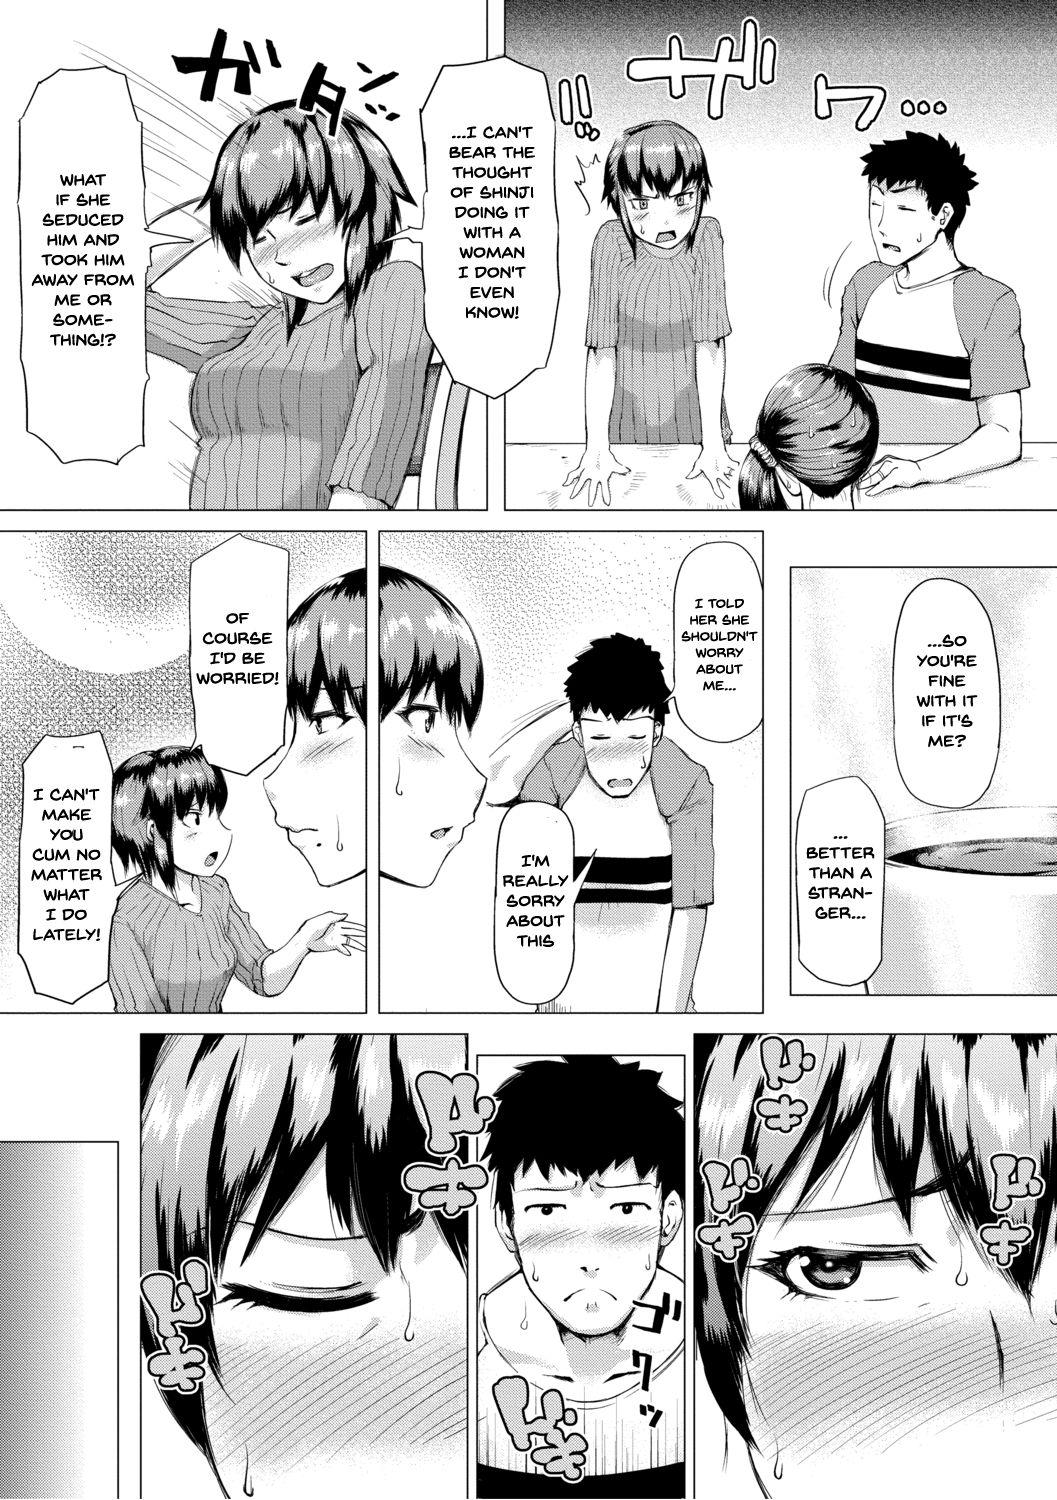 Bucetinha [Kizaru] Gibo ga Haramu Made Zenpen | Until My Mother-in-Law is Pregnant - Part1 [English] [Digital] {Doujins.com} Perverted - Page 6